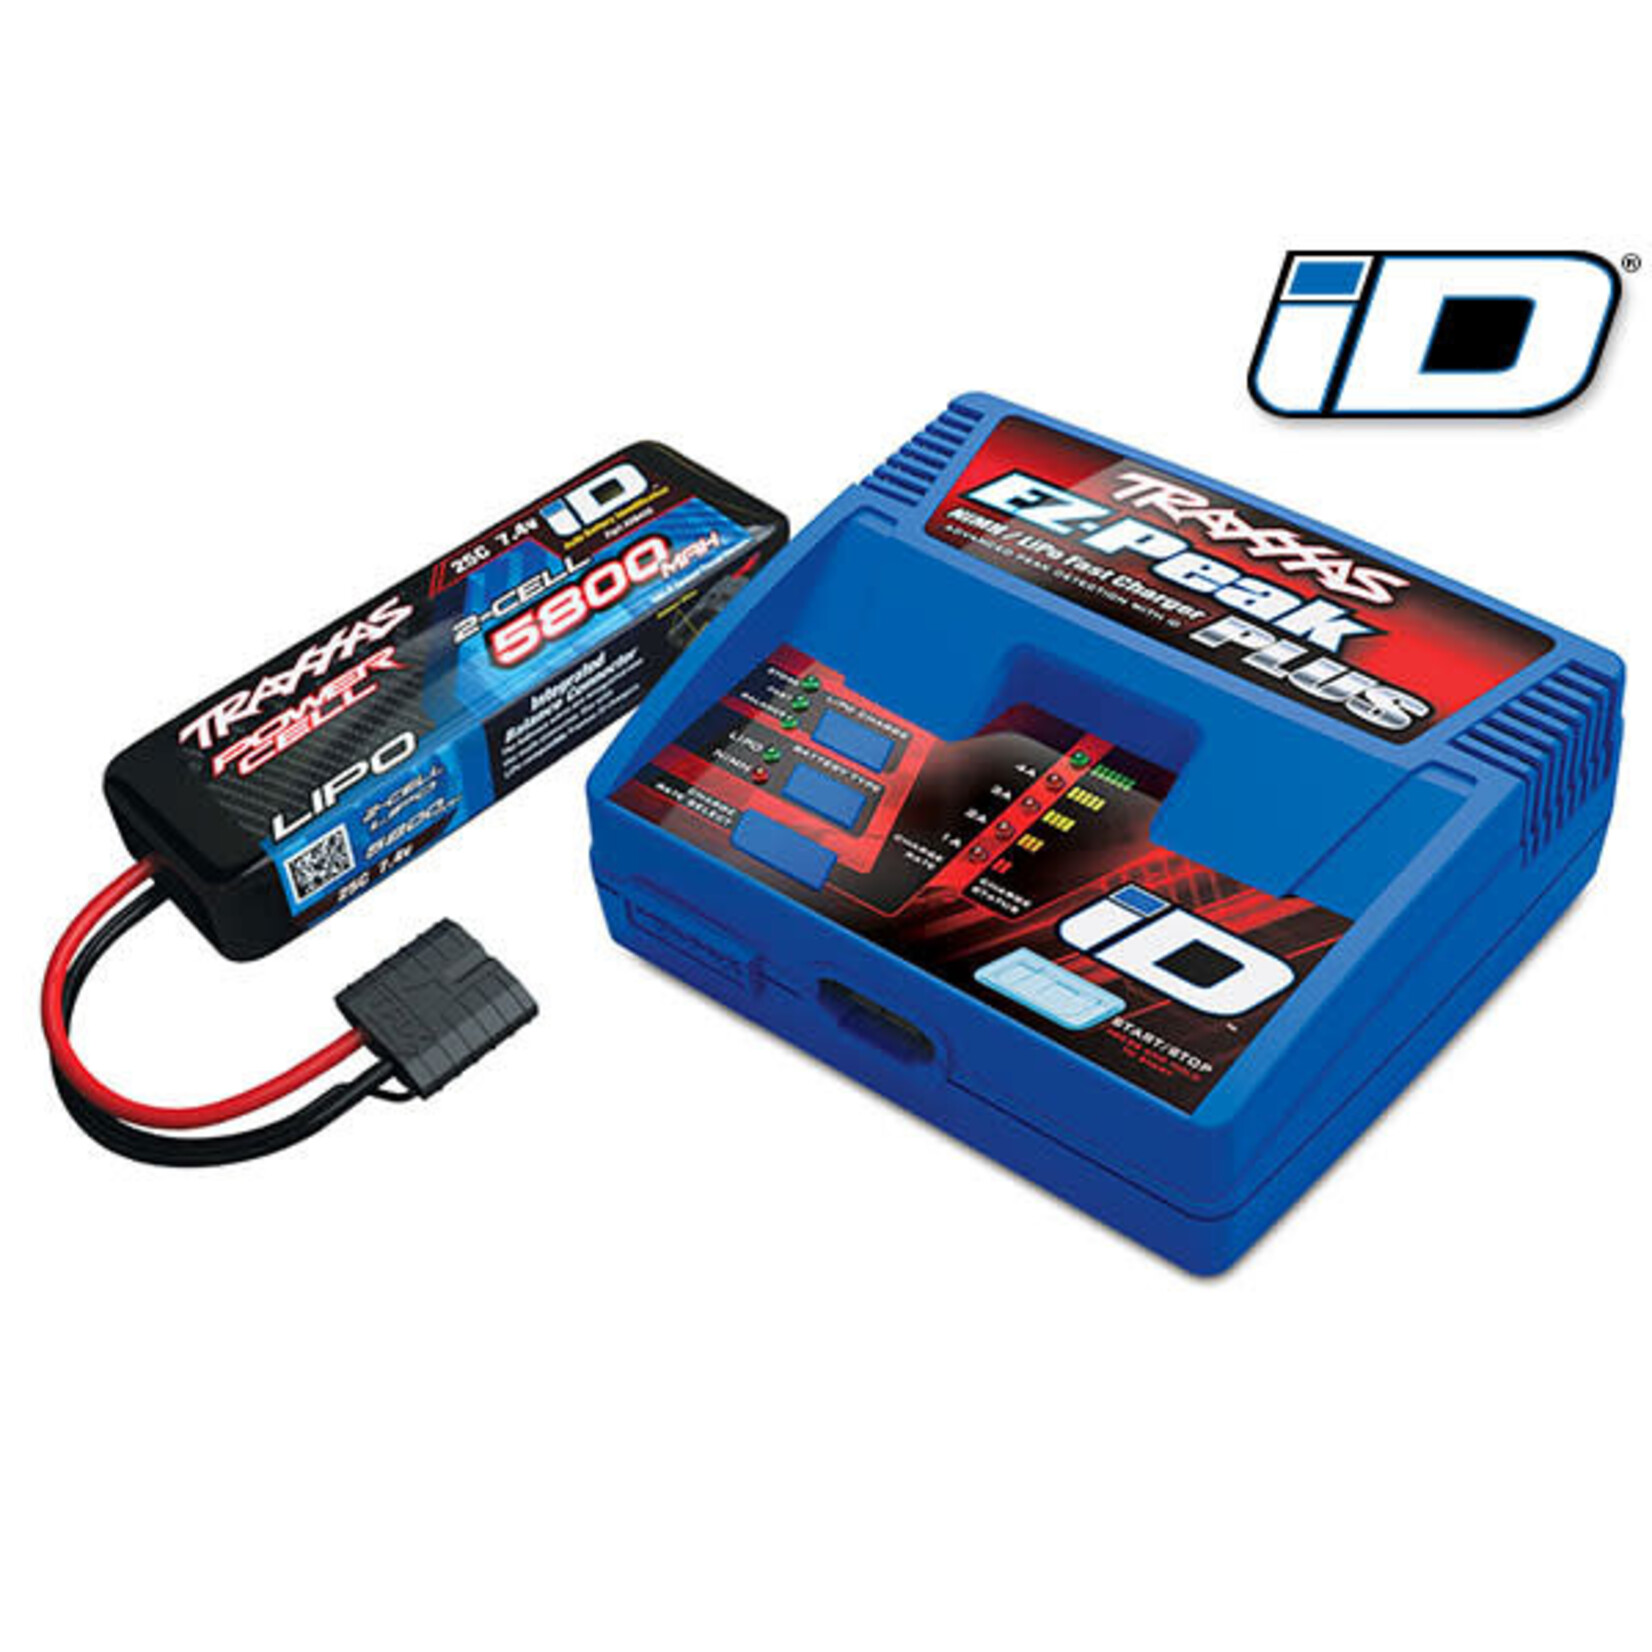 Traxxas Battery/charger completer pack - 2S Battery & Charger